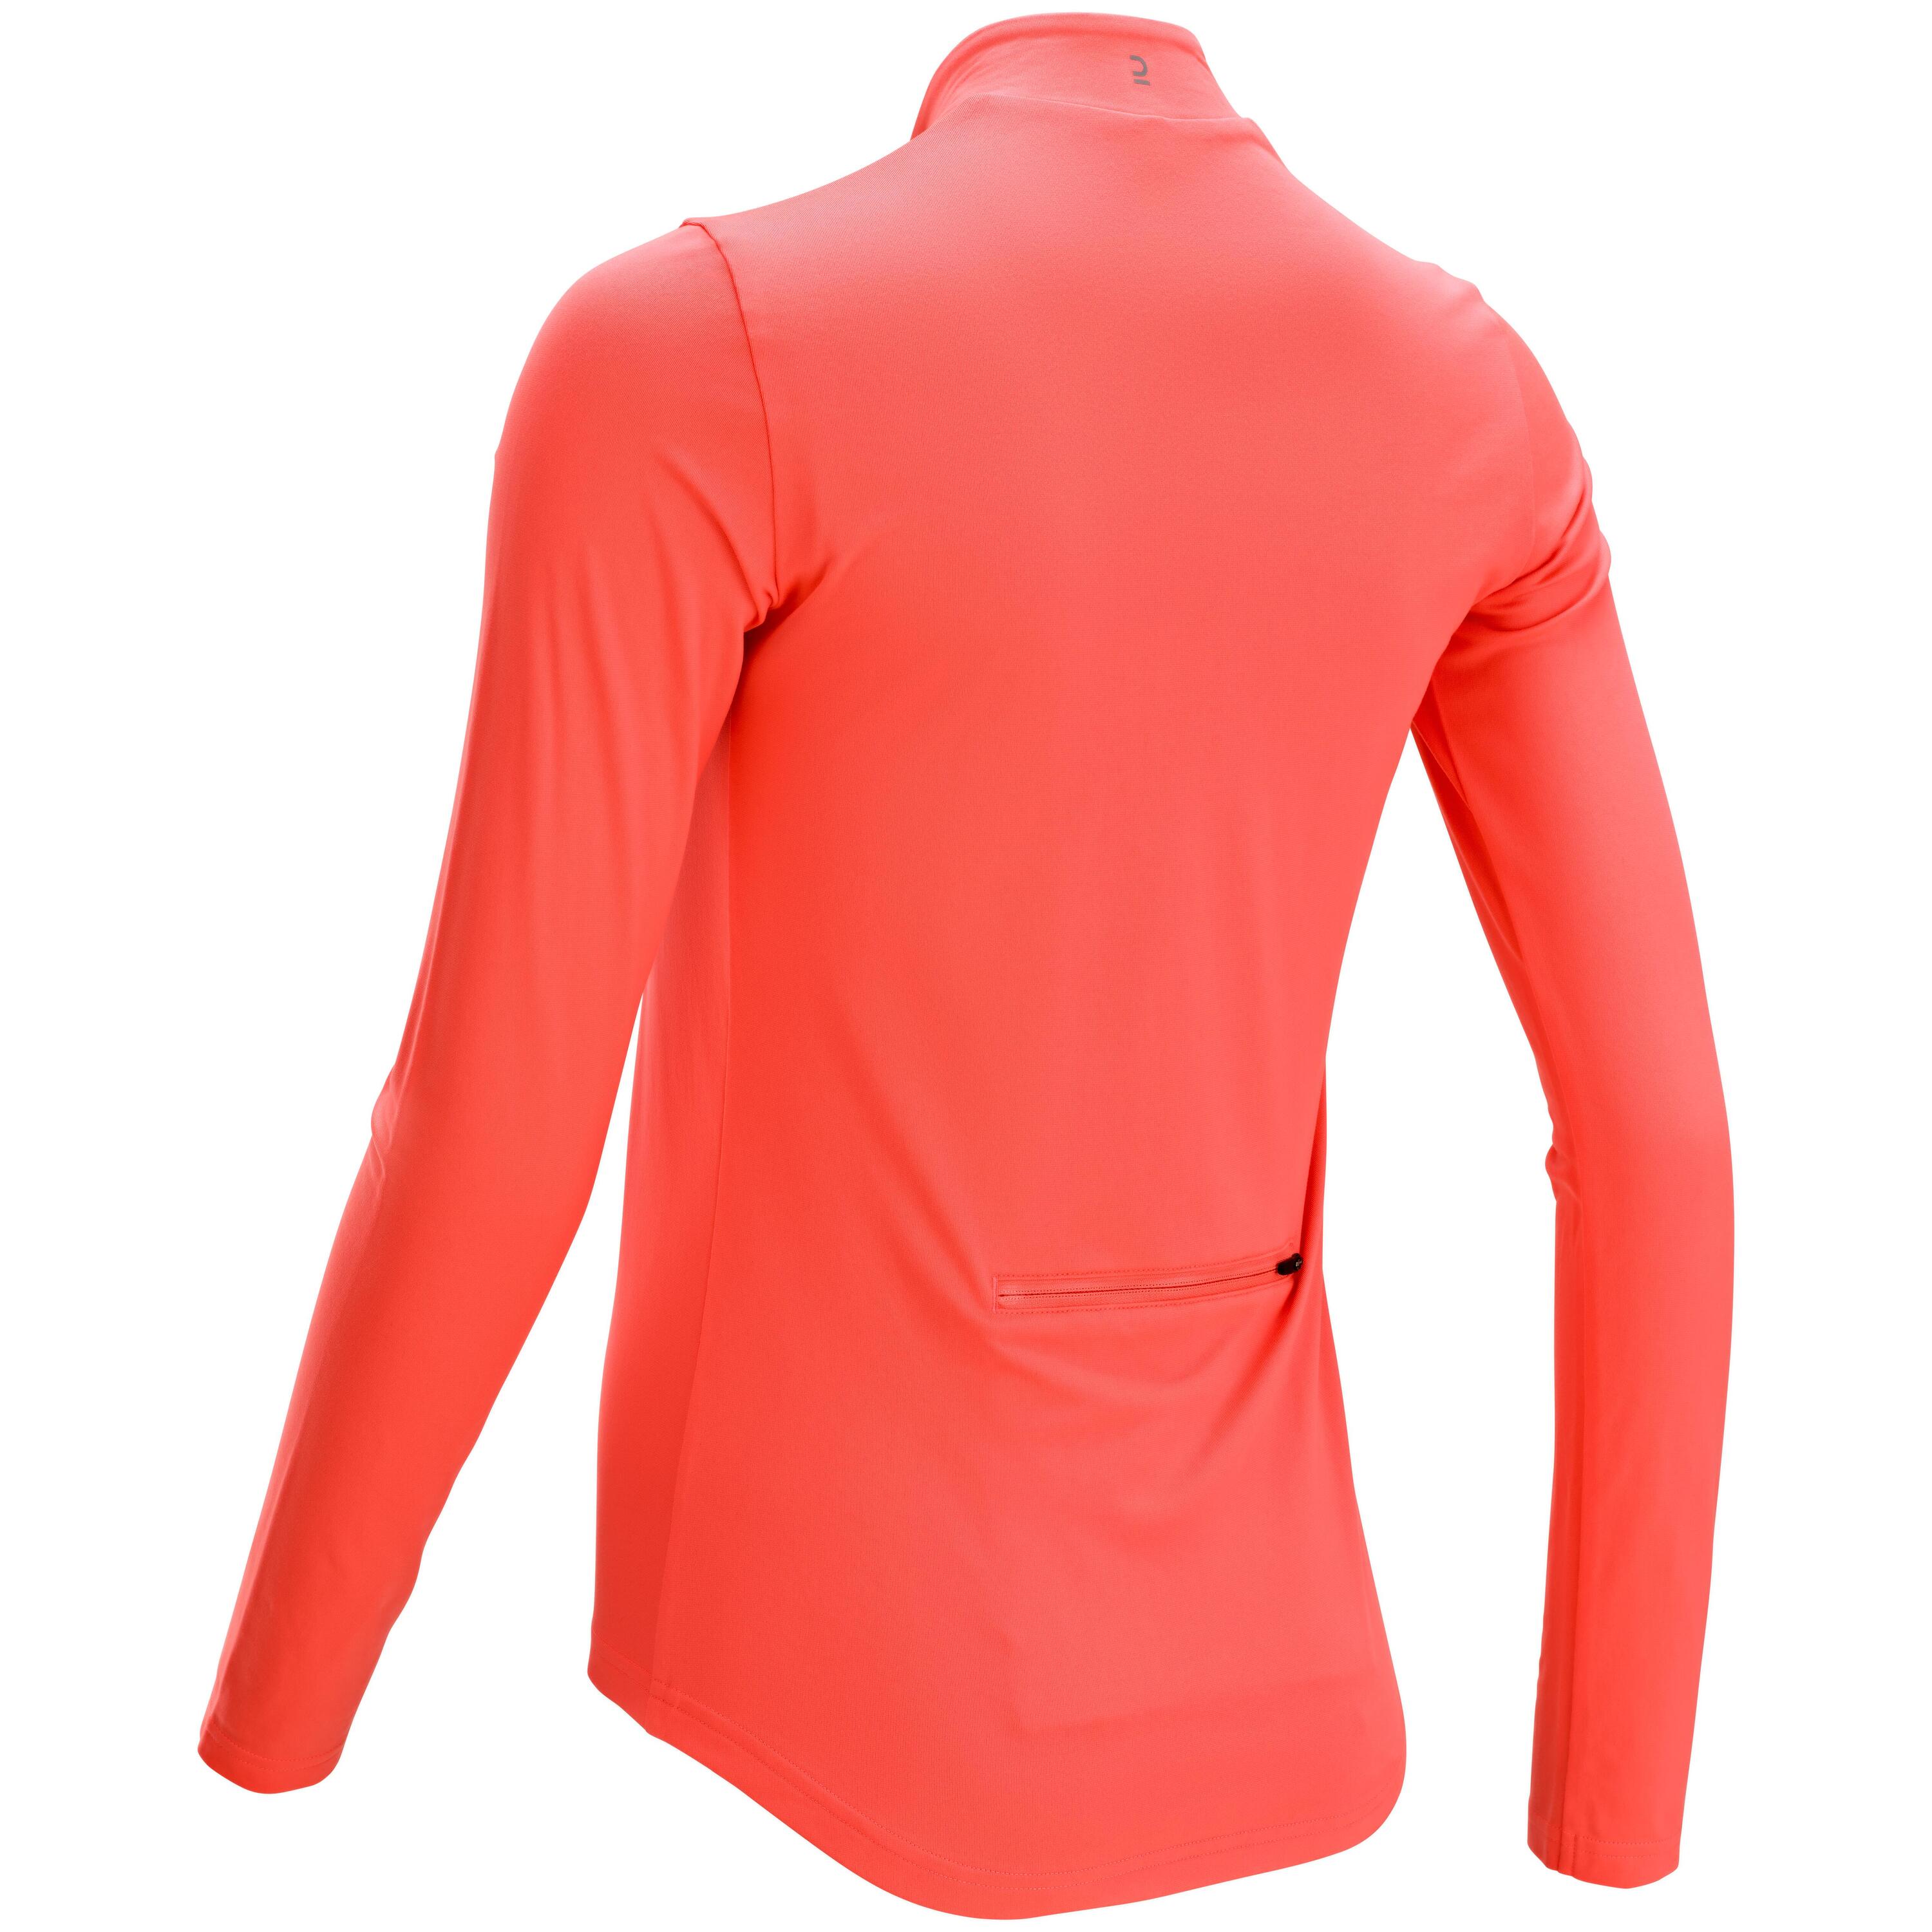 100 Women's Long-Sleeved Road Cycling Jersey - Coral 3/7